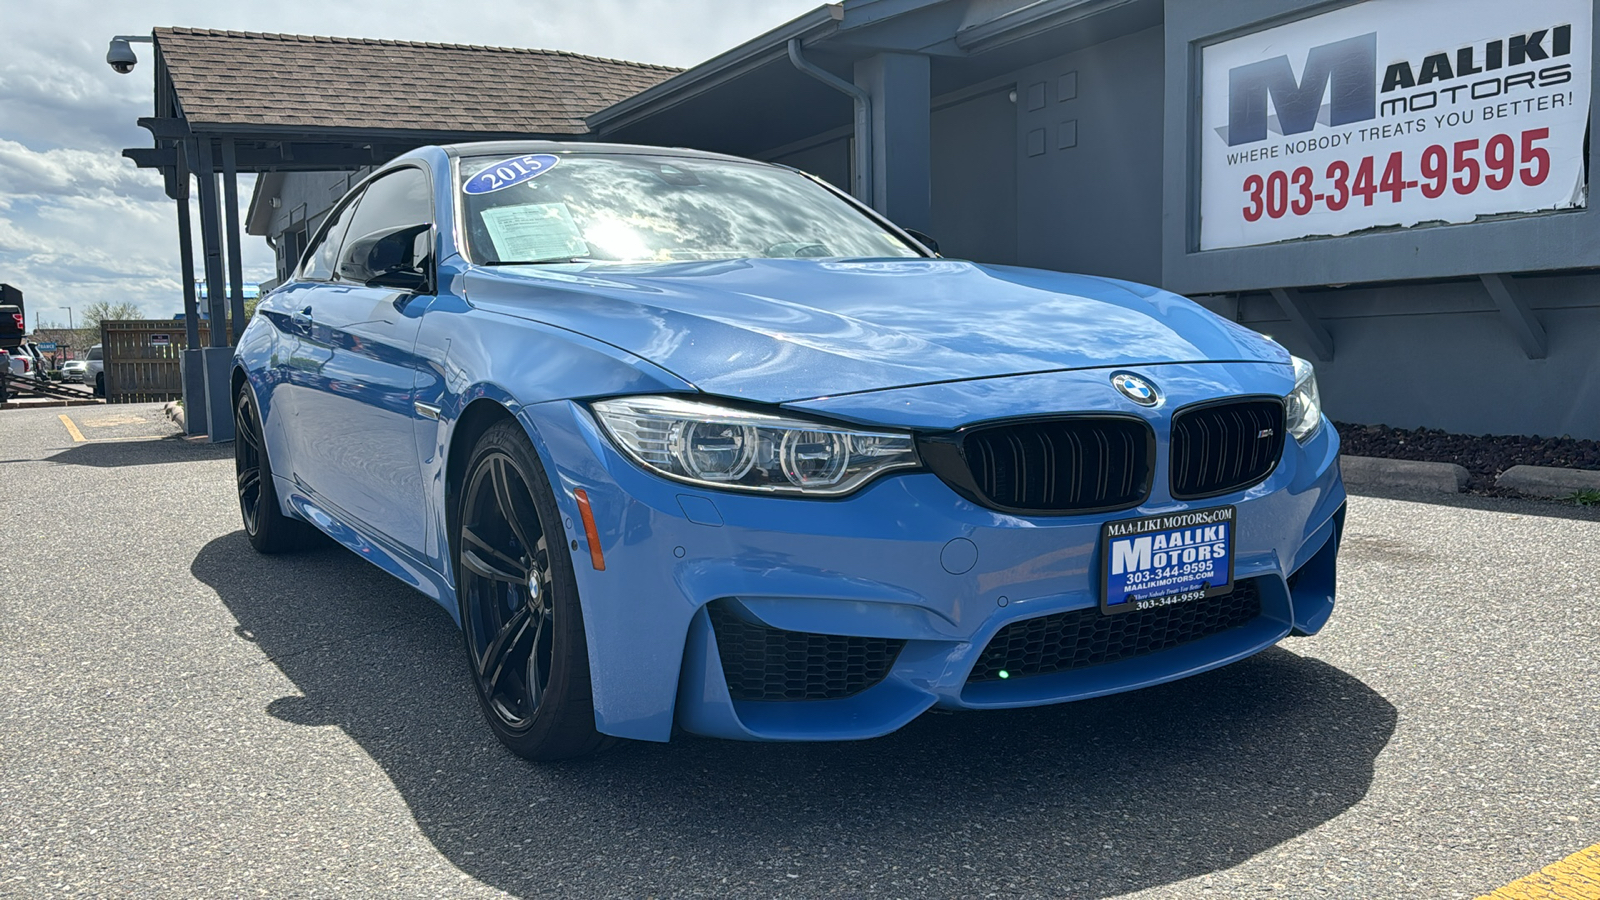 2015 BMW M4  Twin Turbo, Heated Seats, Leather, Navigation Sys 1